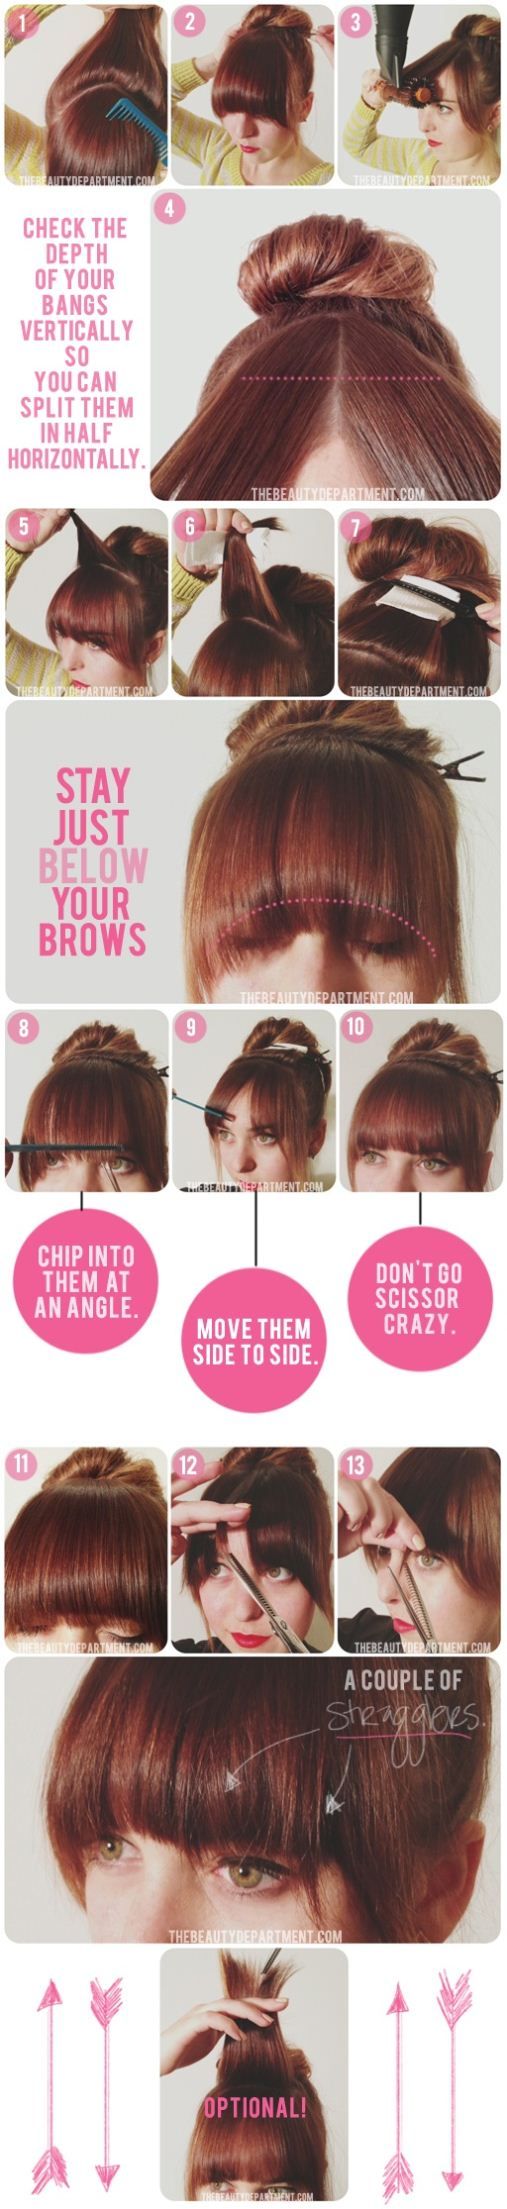 how-to-cut-your-bangs via